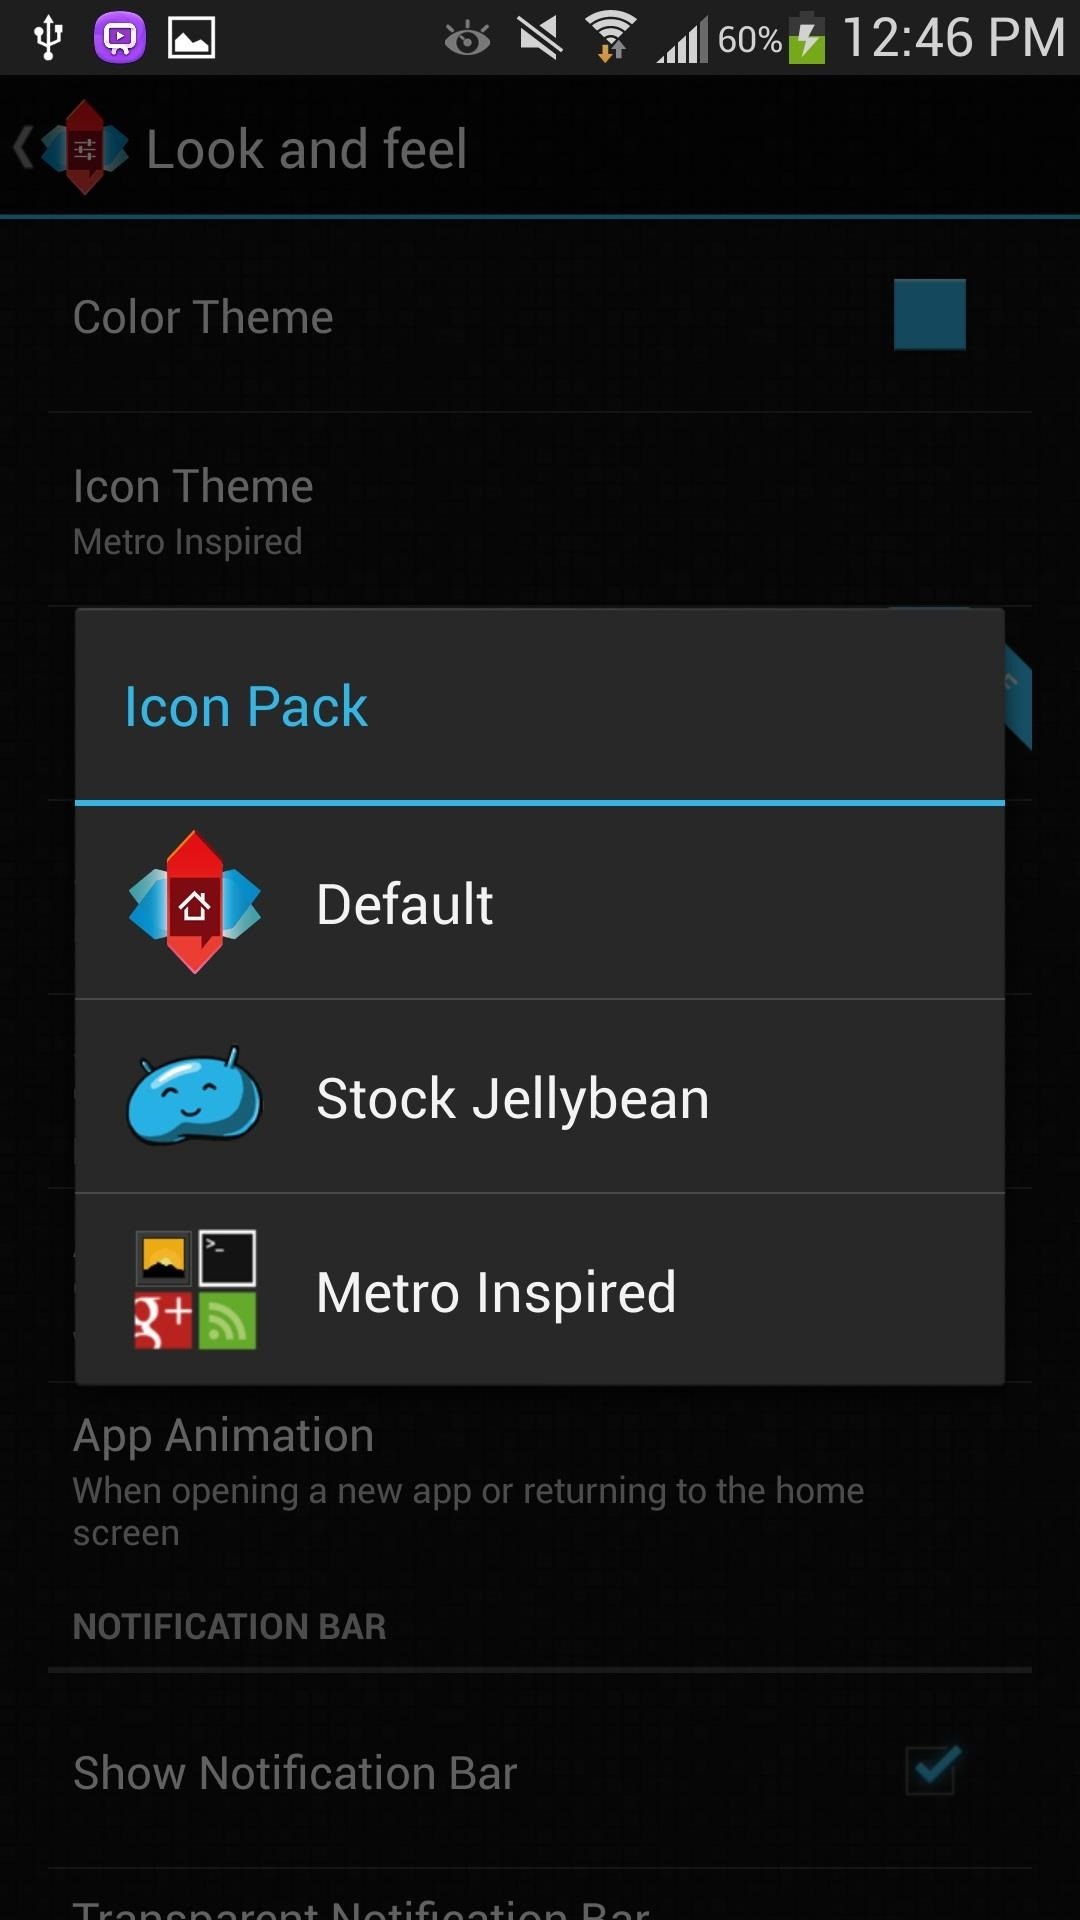 How to Get "Metro-Inspired" App Icons on Your Samsung Galaxy S4 for a Sleek-Looking Home Screen